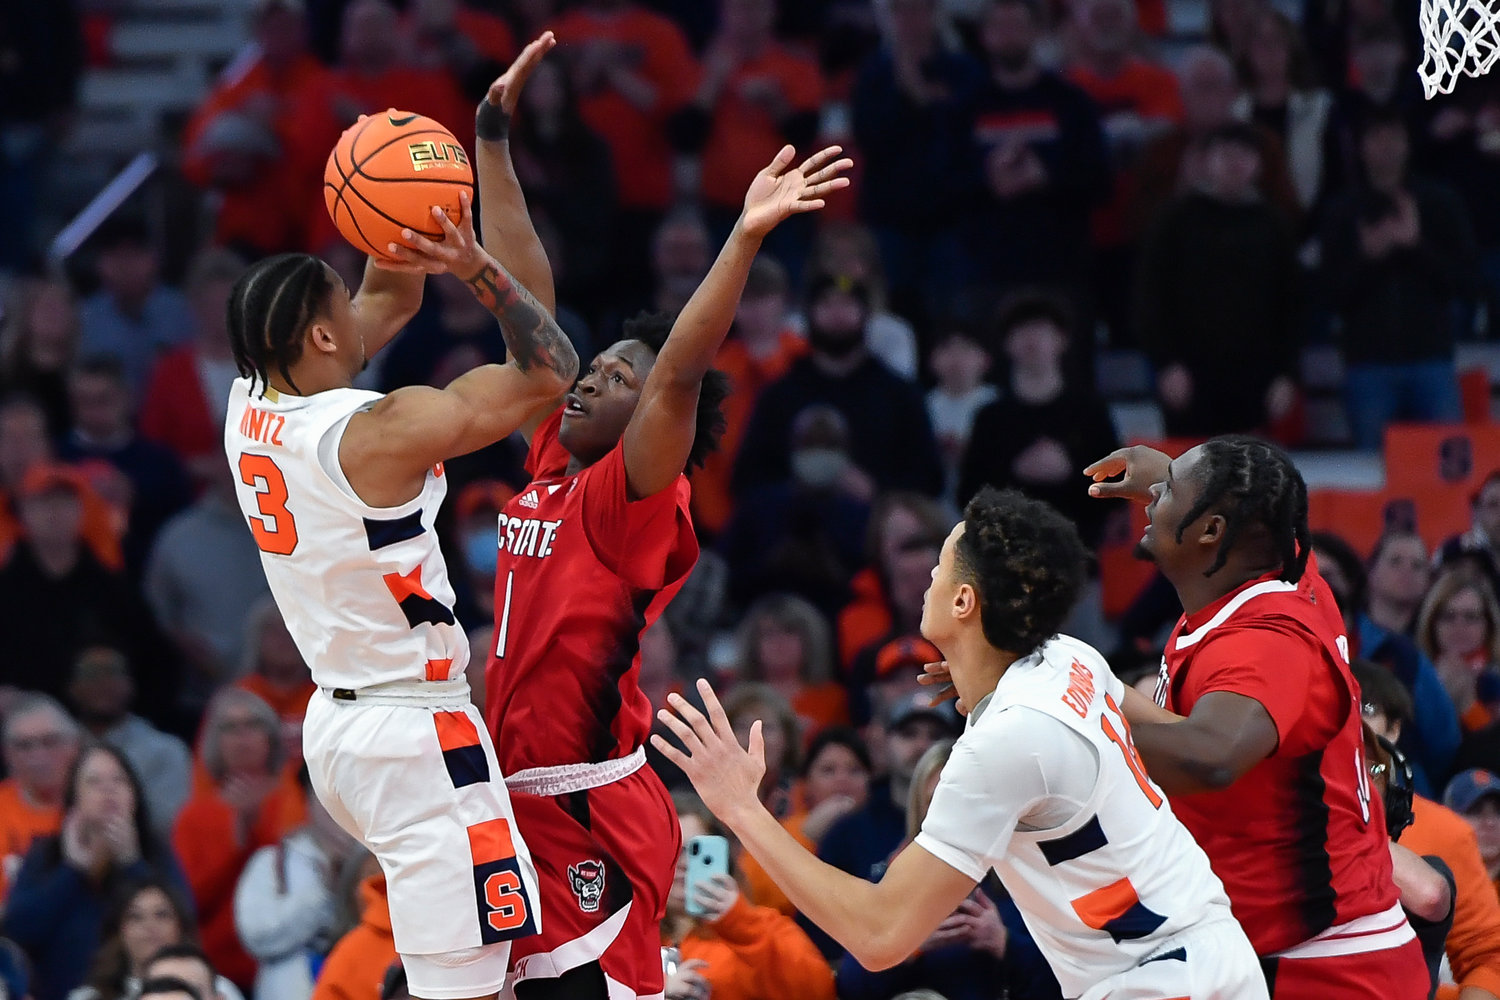 Syracuse guard Judah Mintz, left, shoots while defended by North Carolina State guard Jarkel Joiner during the first half of Tuesday night's game at the JMA Wireless Dome in Syracuse. Mintz scored 20 points as the Orange won 75-72.